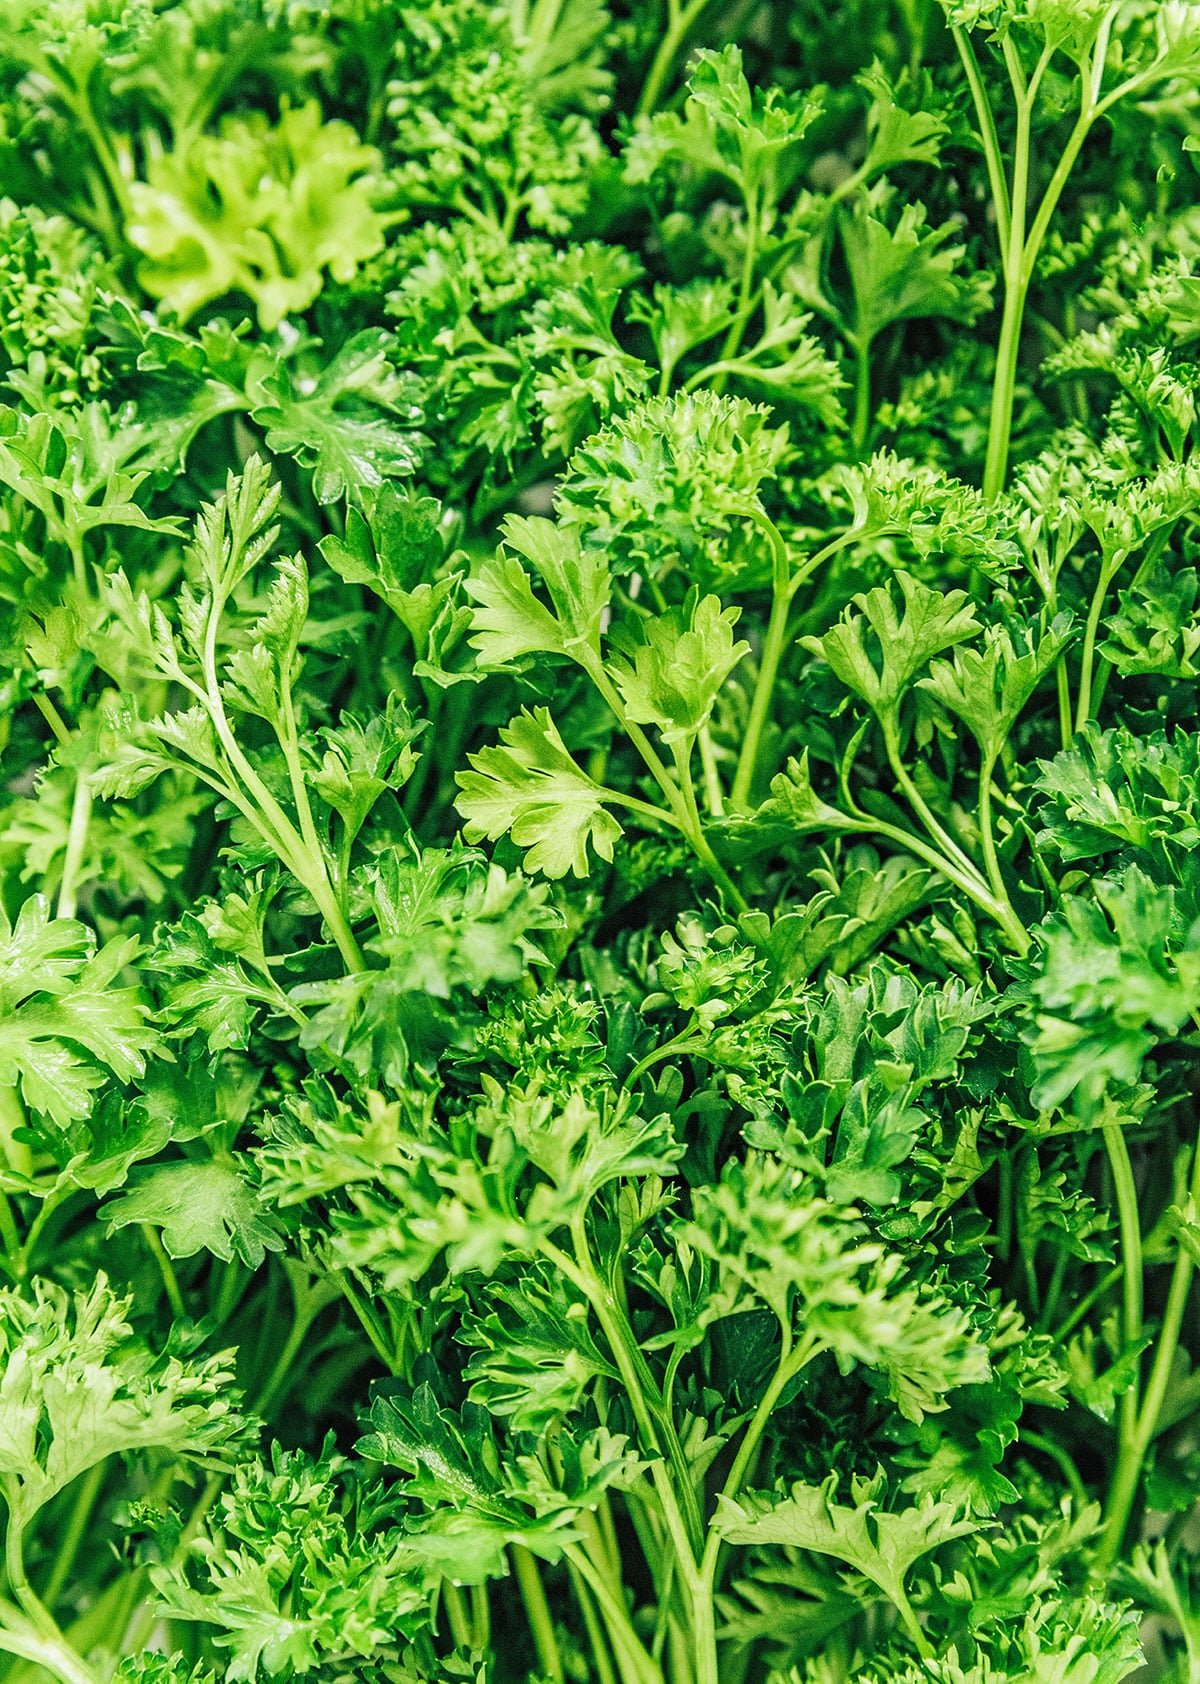 An up close view detailing the texture of curly parsley